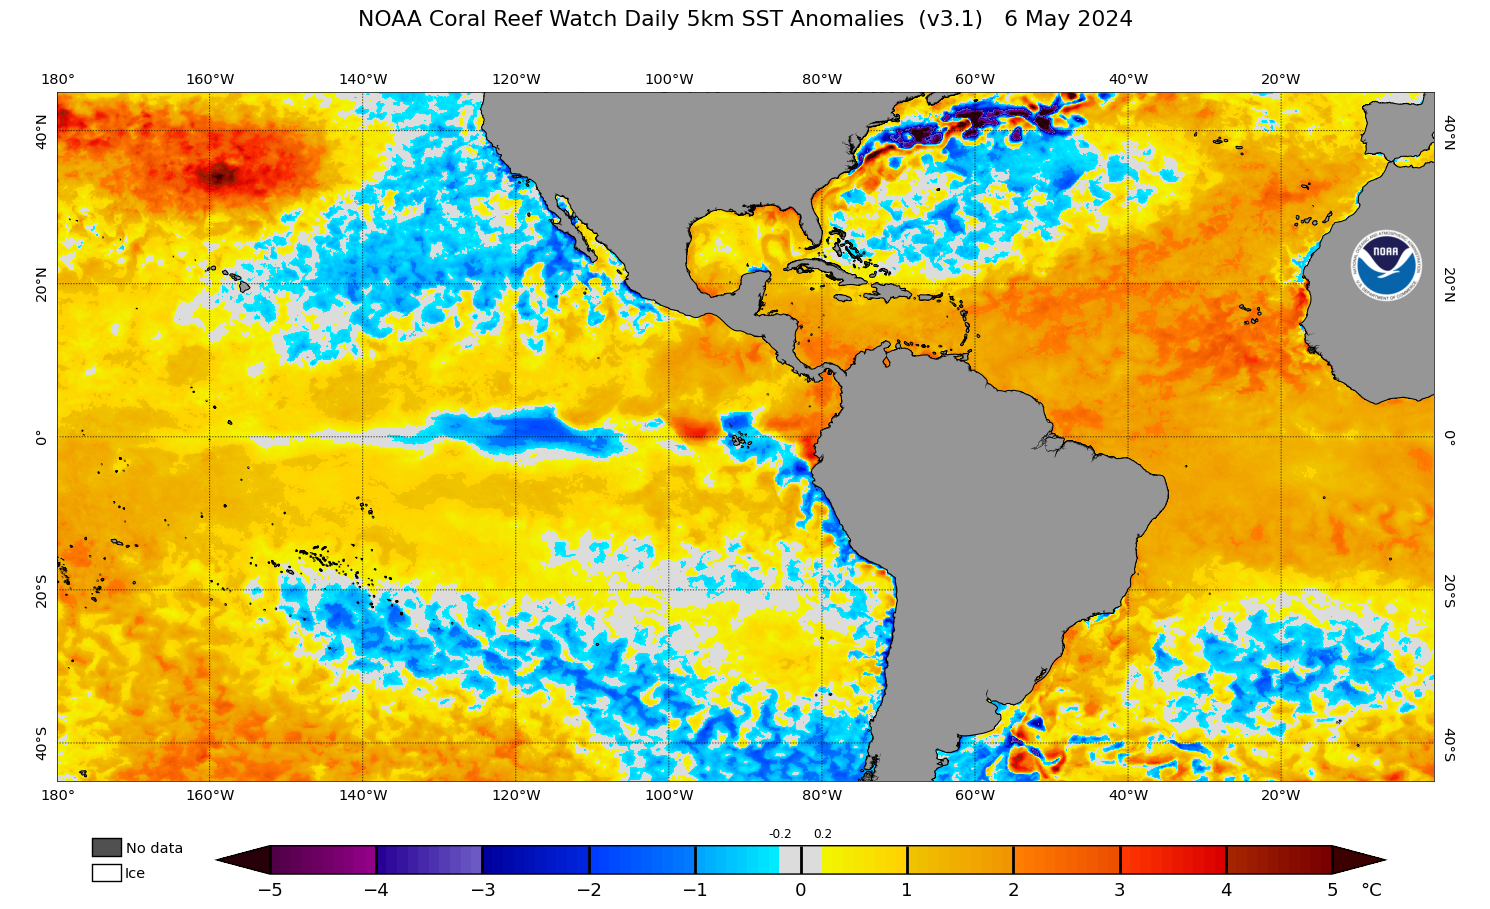 SSTA map - Sea Surface Temperature Anomalies. Zone: West